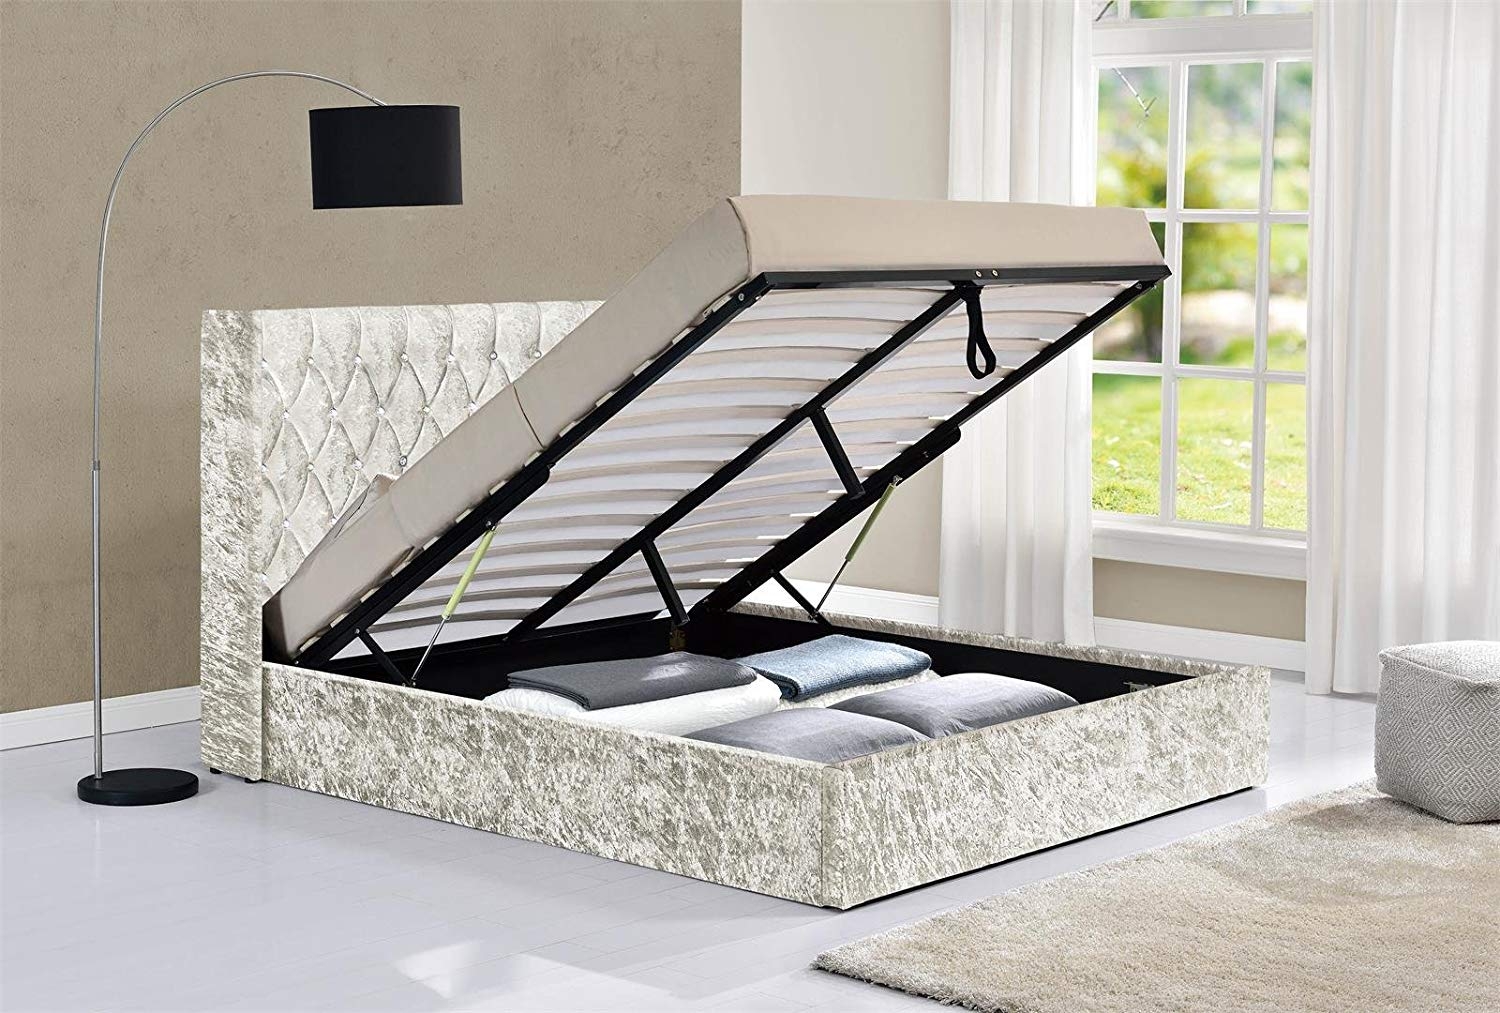 Wing Ottoman Bed Available in all colours and Sizes vary from double king and super king